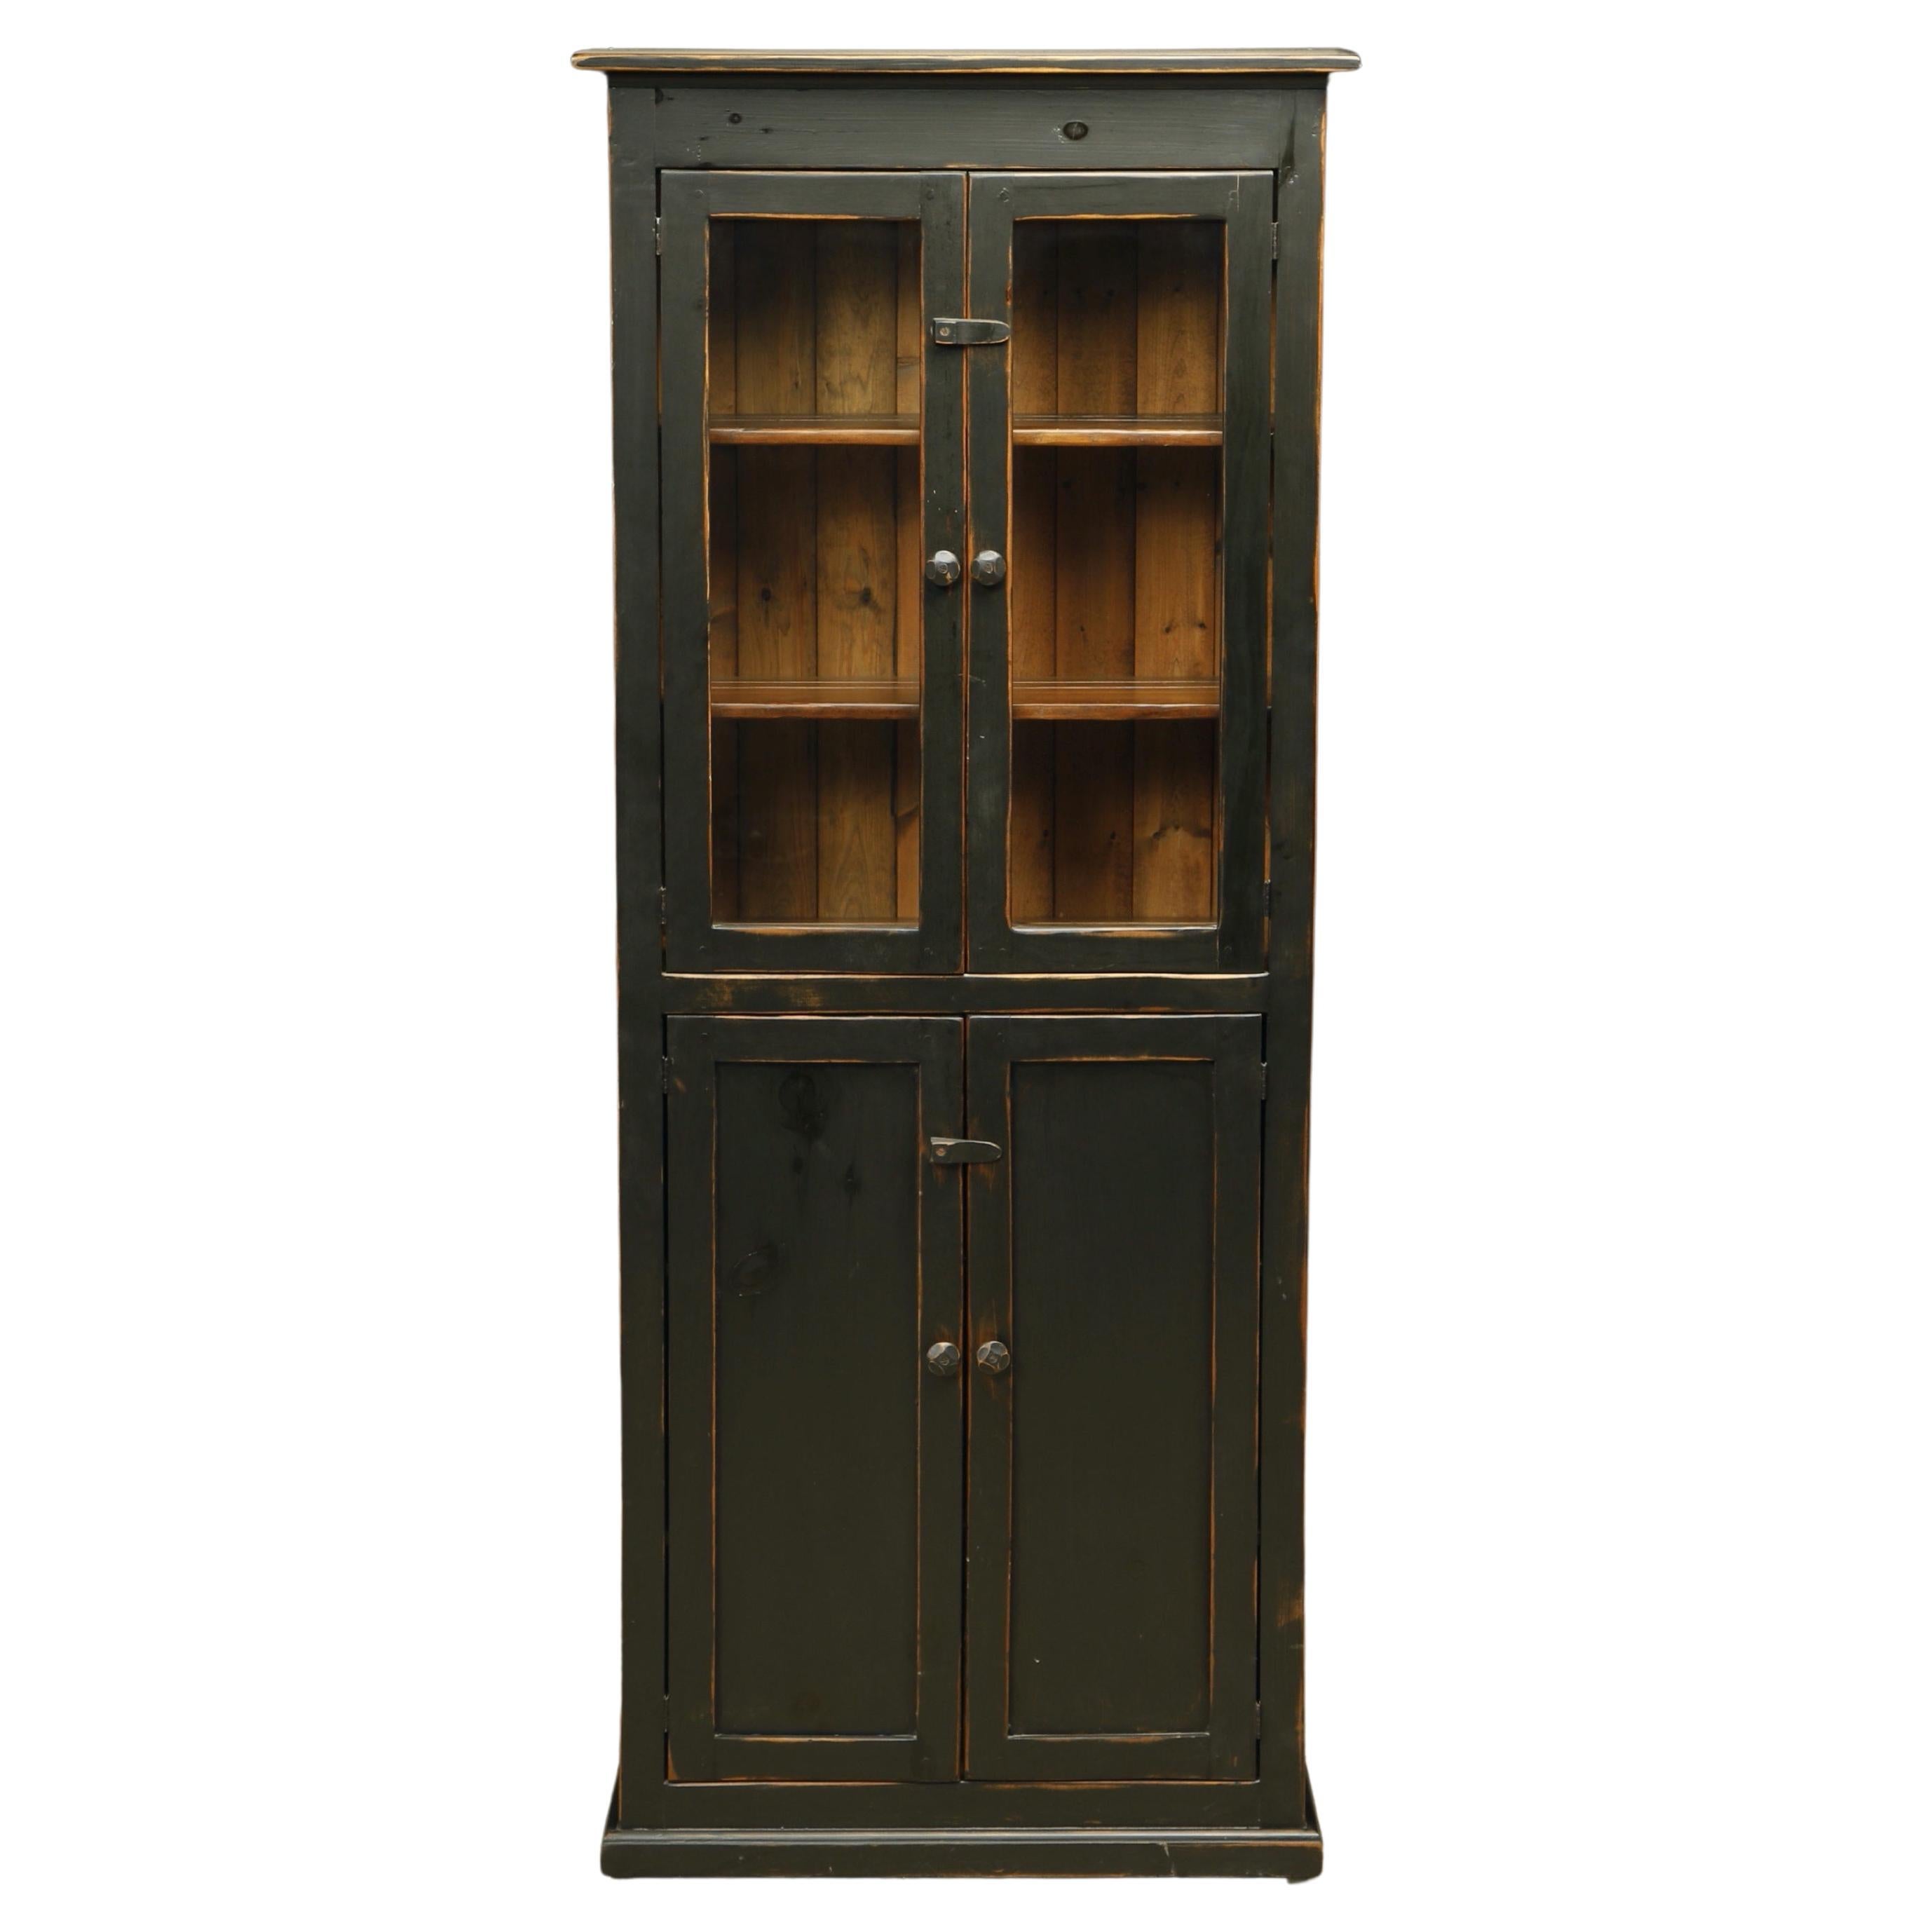 Rustic Painted Pine Cupboard Cabinet